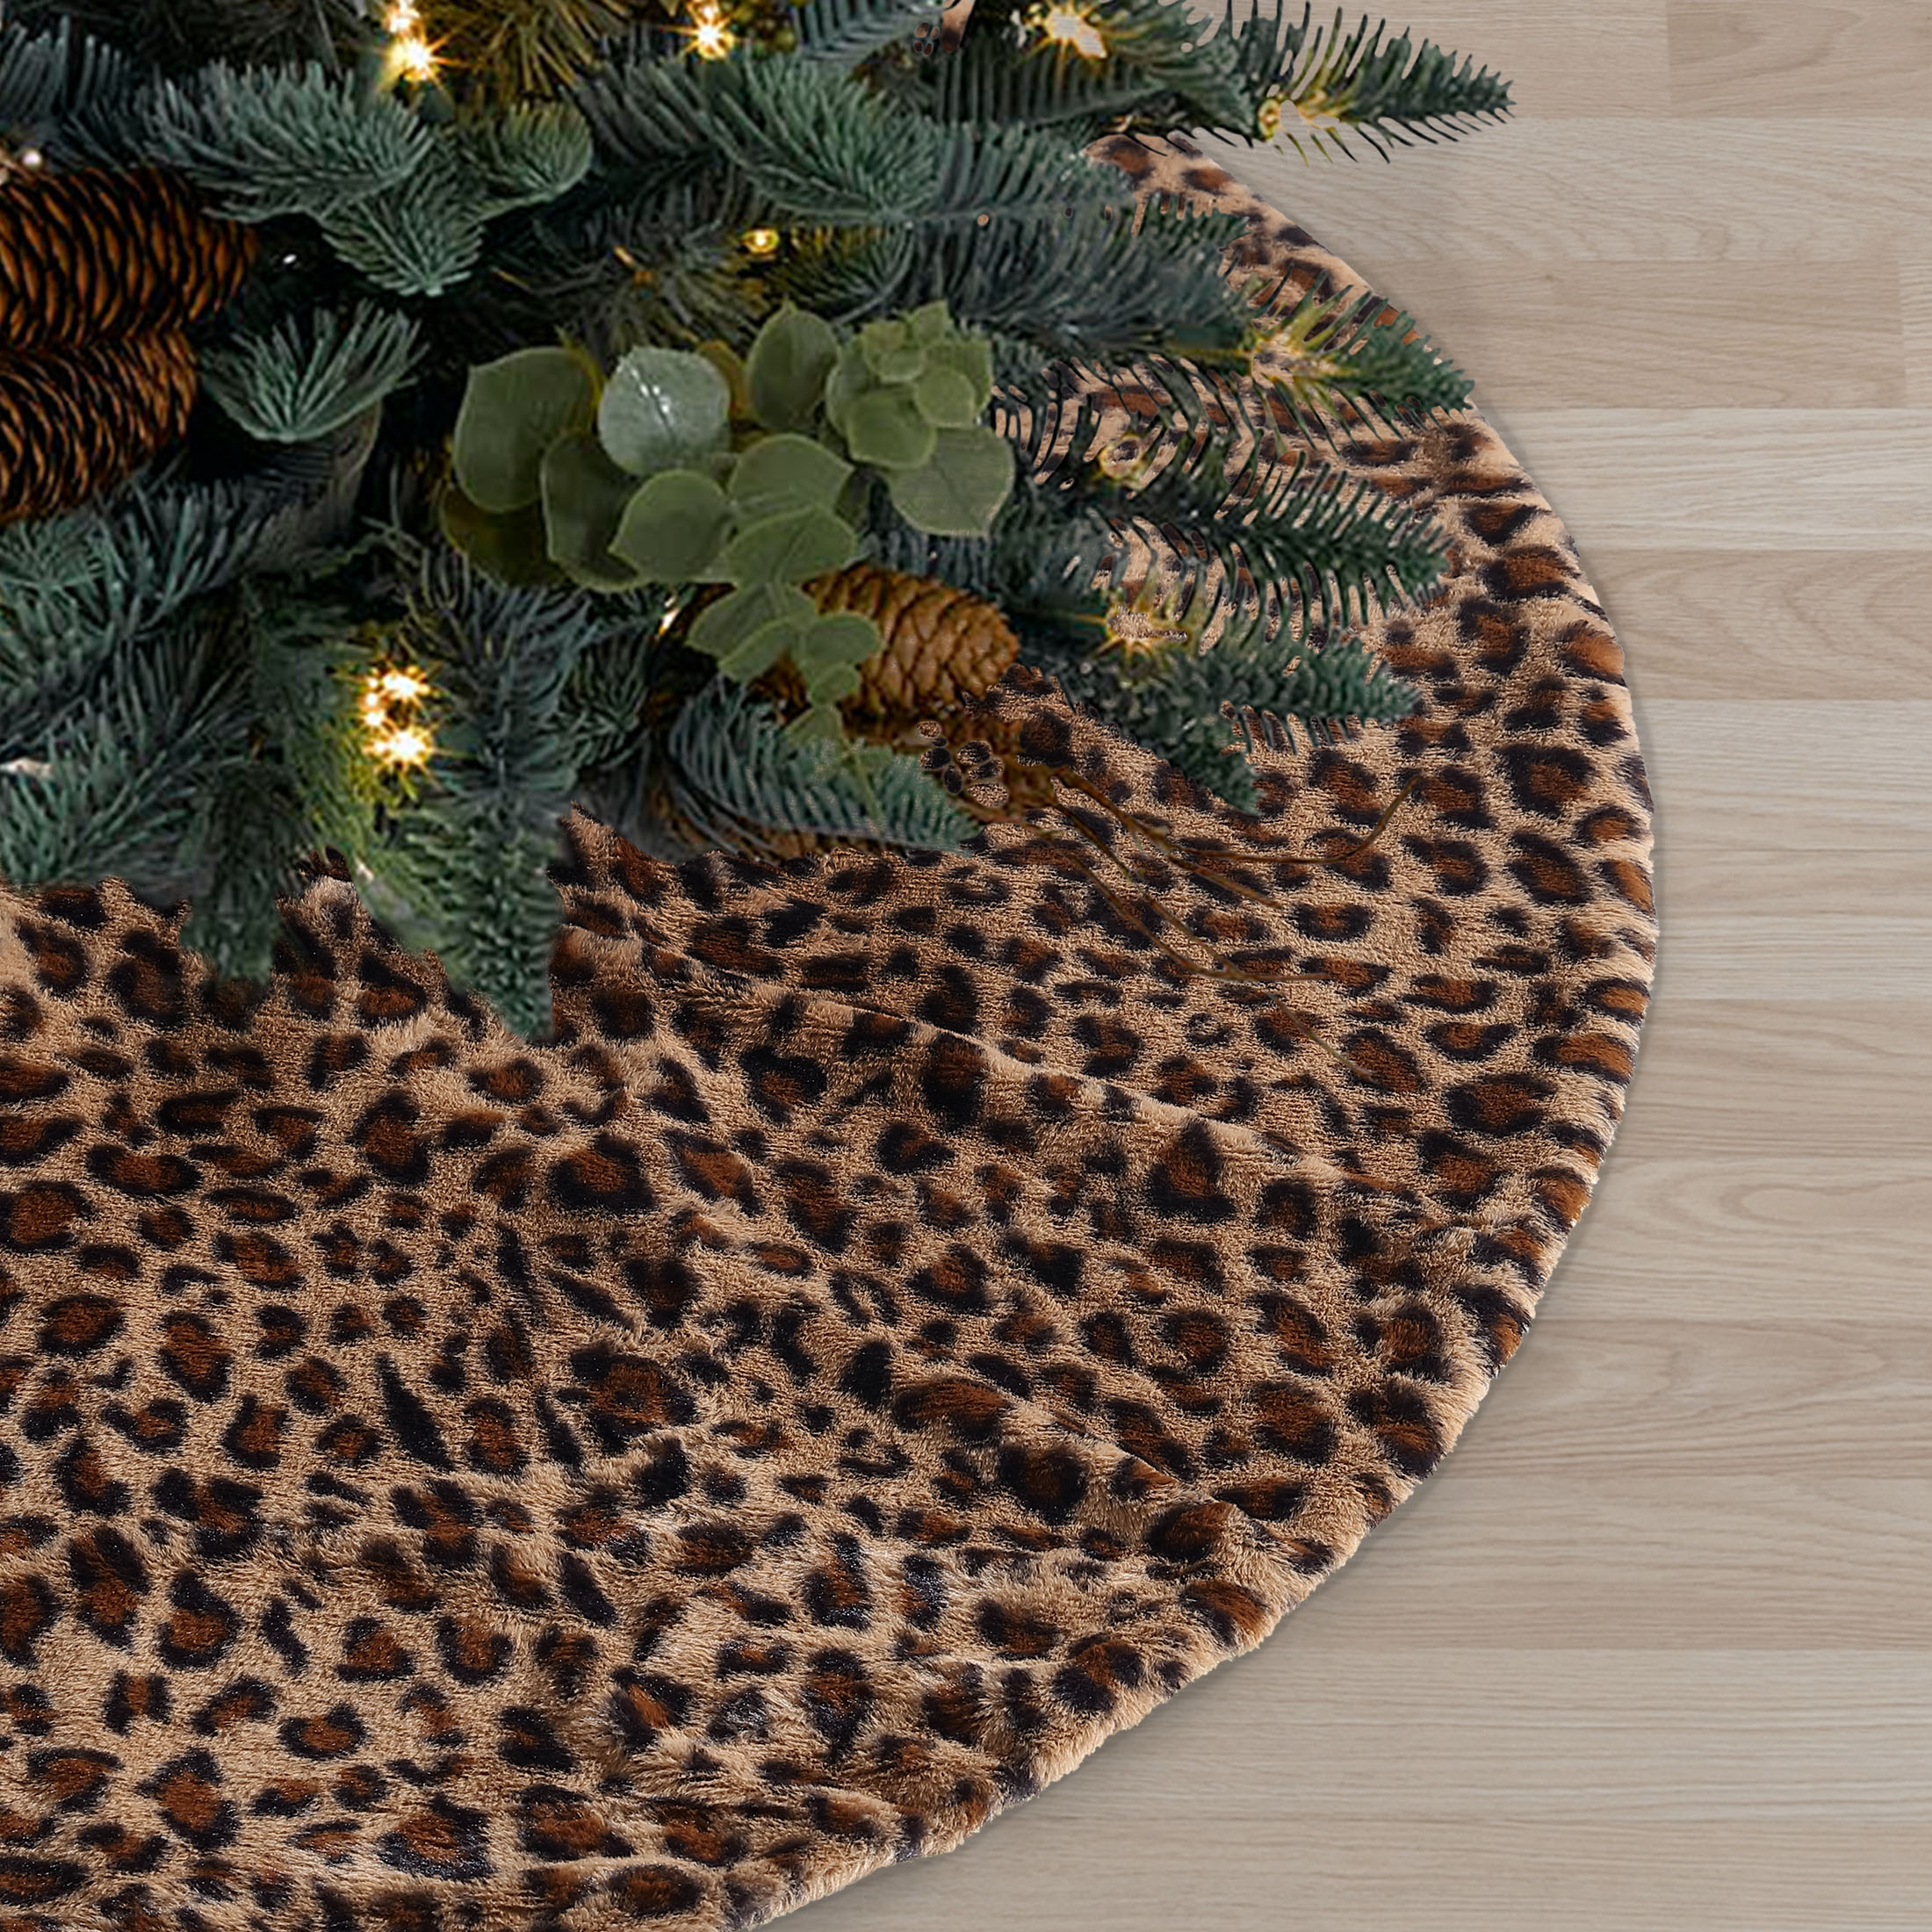 Holiday Time, Rabbit Faux Fur Leopard Print Tree Skirt, 56" - image 2 of 5